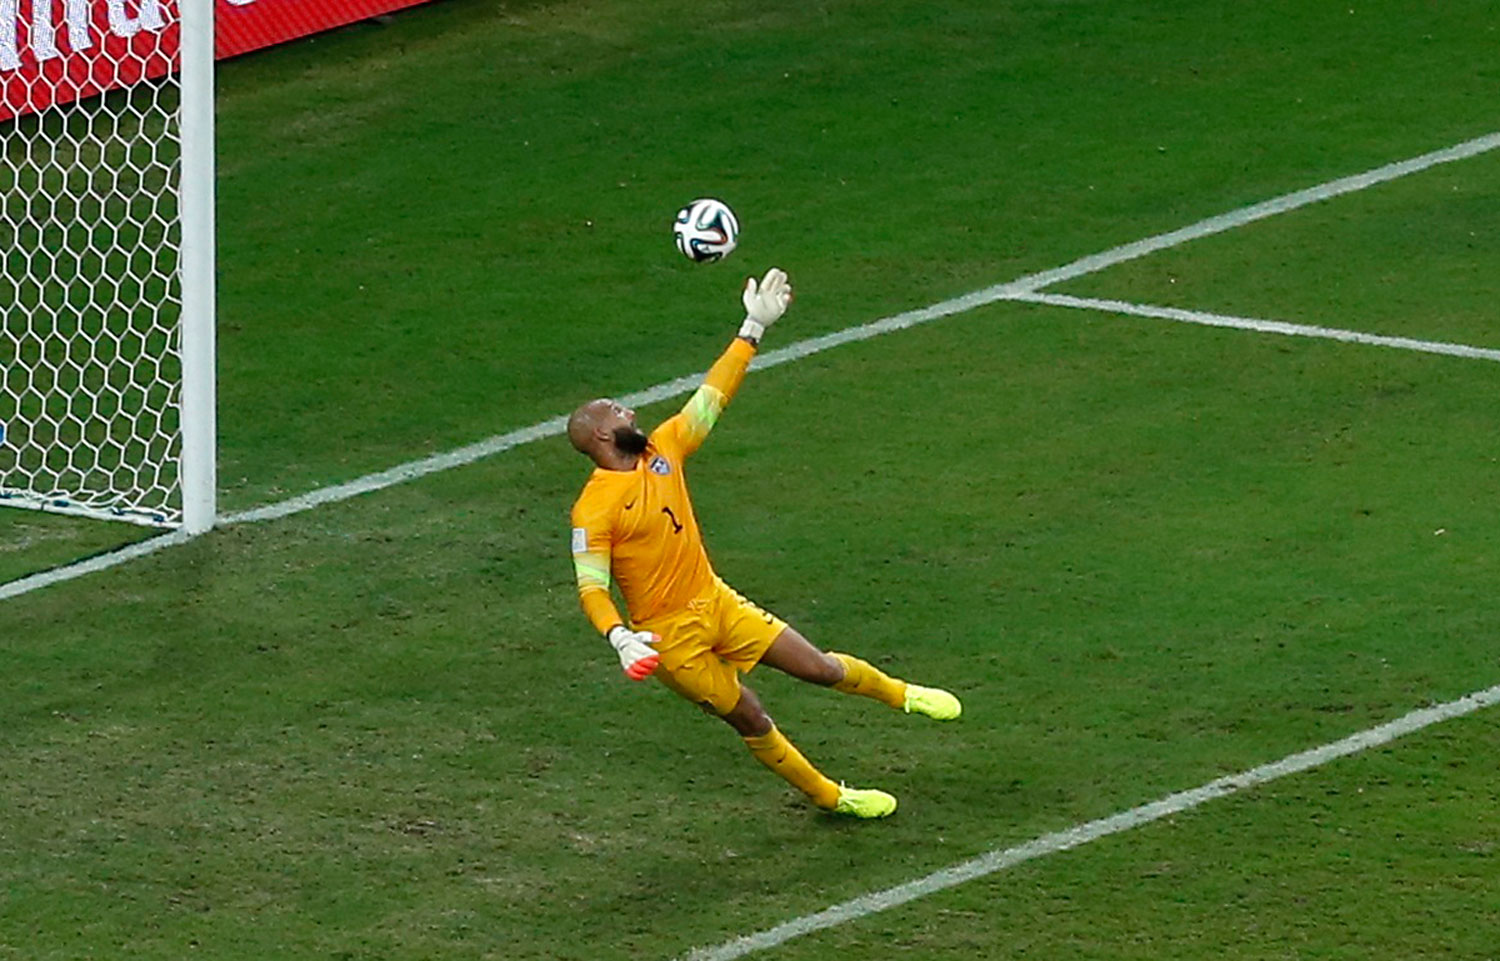 Tim Howard of the U.S. saves a shot by Portugal's Eder.